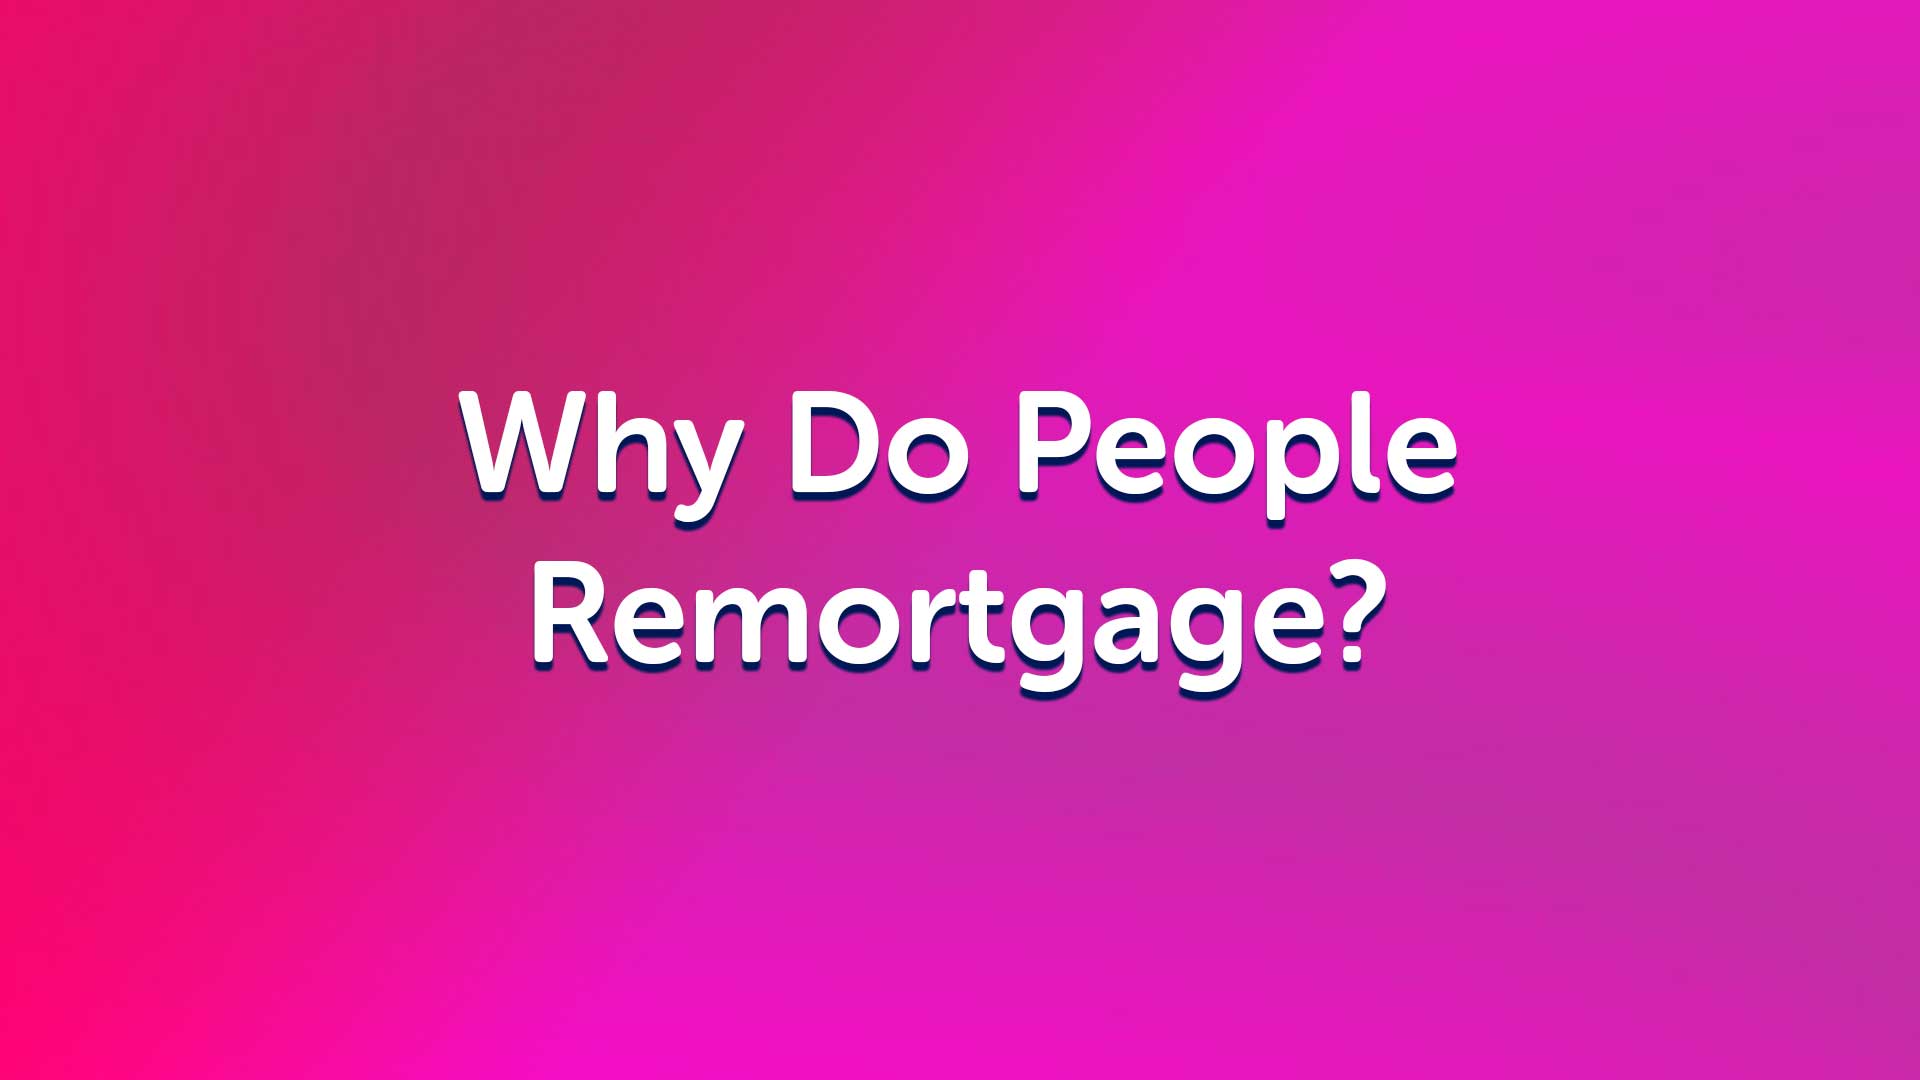 Why do people remortgage in Middlesbrough? Middlesbroughmoneyman mortgage advice in Middlesbrough